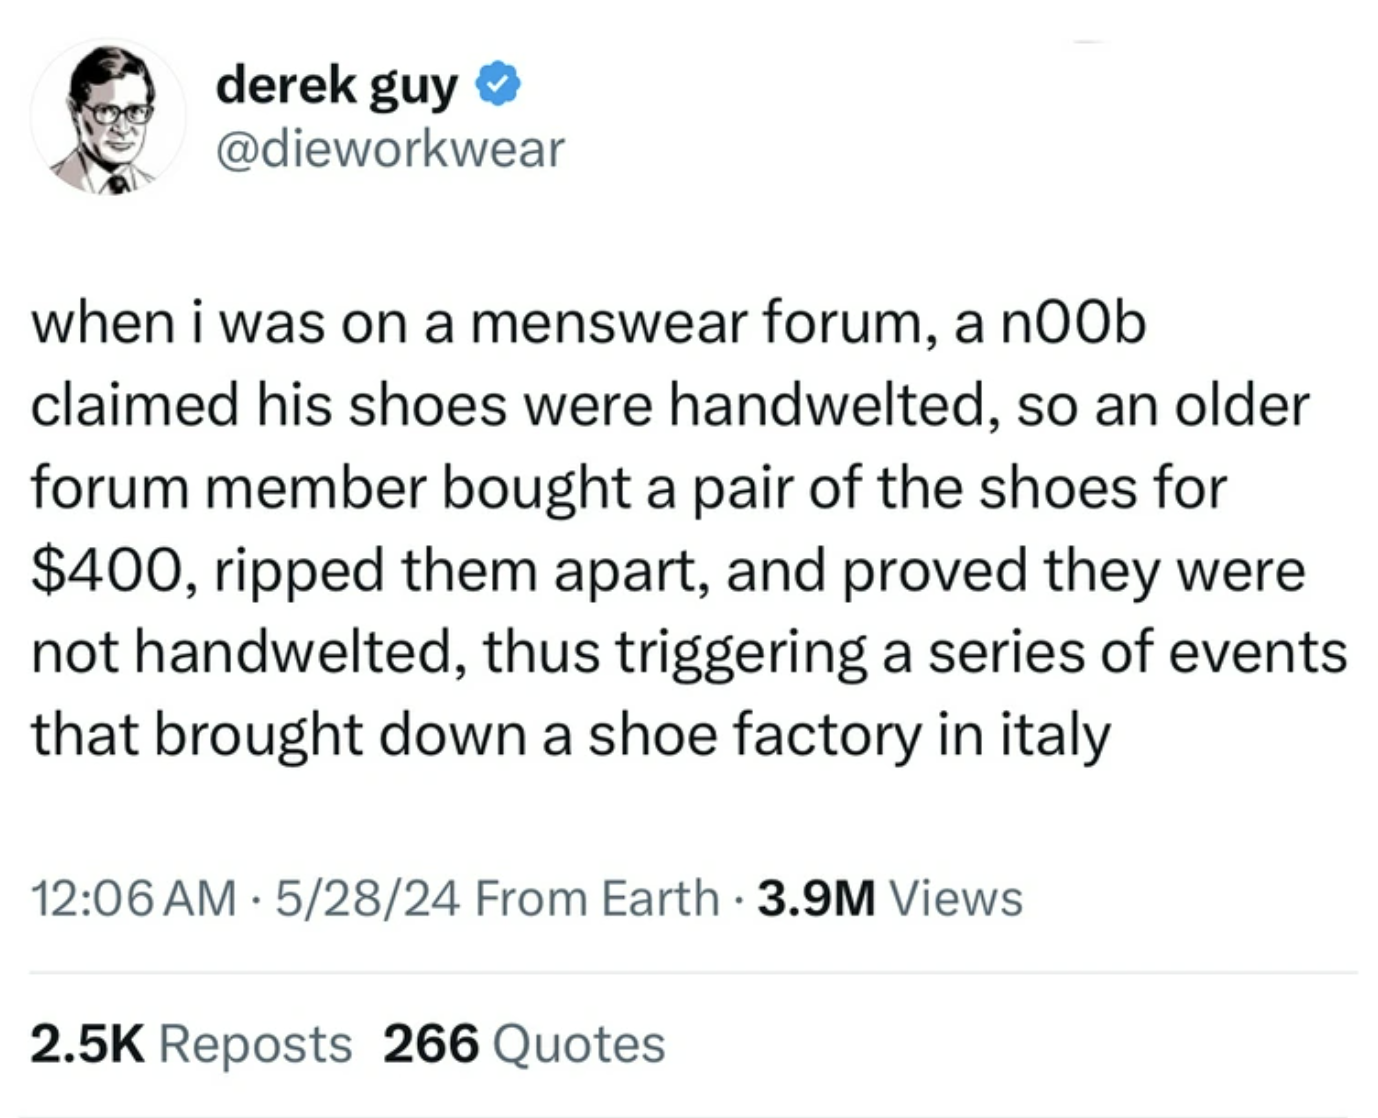 screenshot - derek guy when i was on a menswear forum, a n00b claimed his shoes were handwelted, so an older forum member bought a pair of the shoes for $400, ripped them apart, and proved they were not handwelted, thus triggering a series of events that 